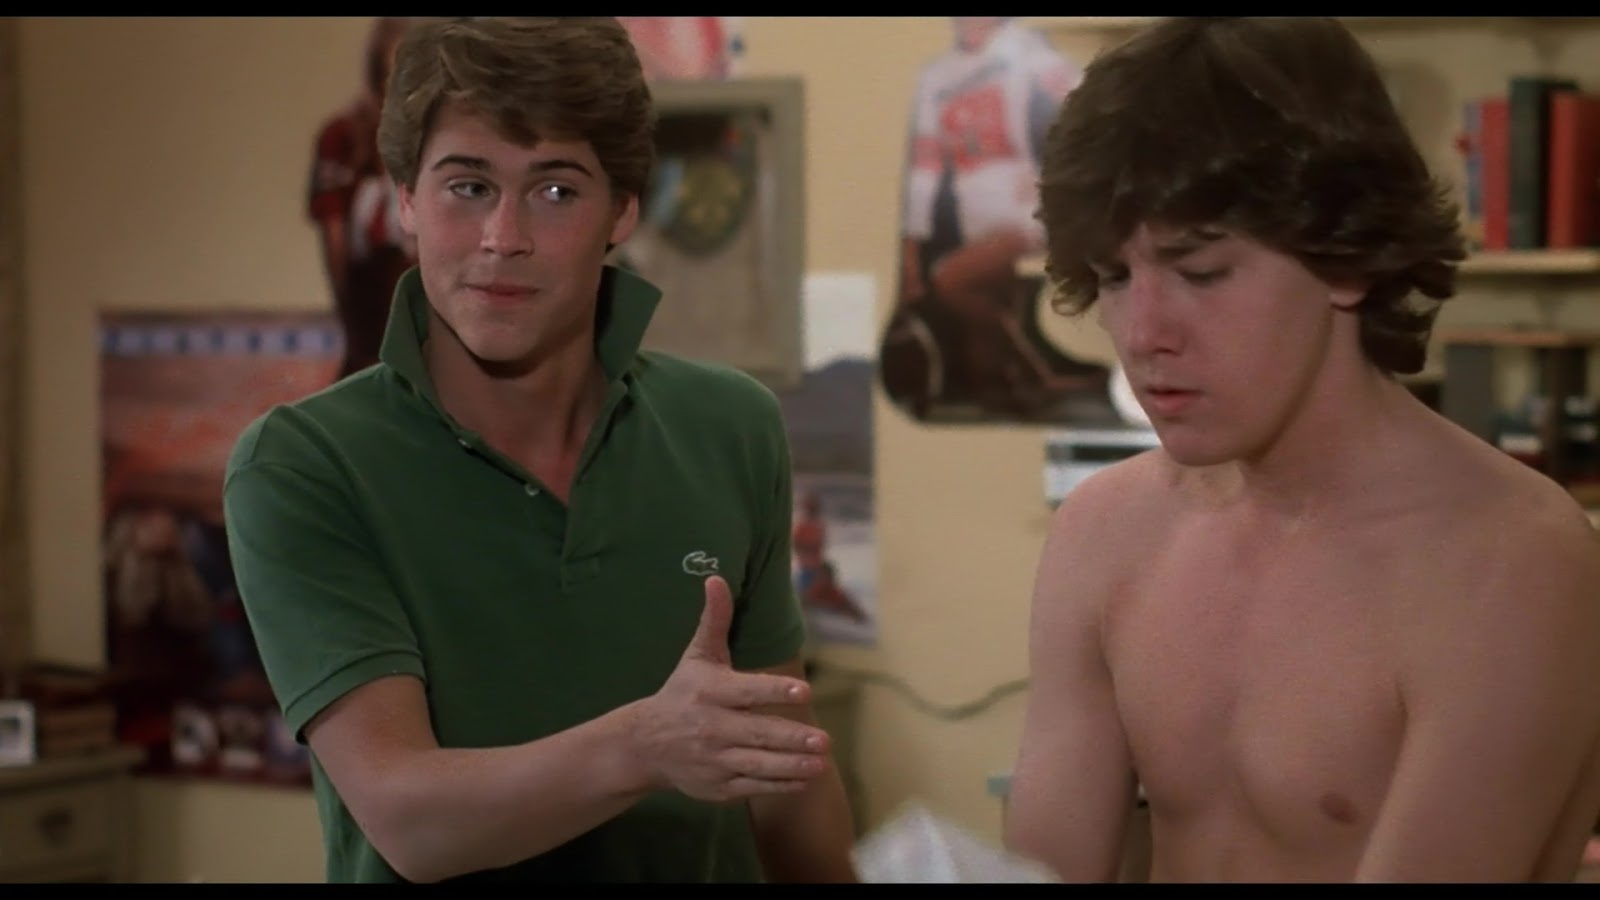 Rob Lowe and Andrew McCarthy shirtless in Class.